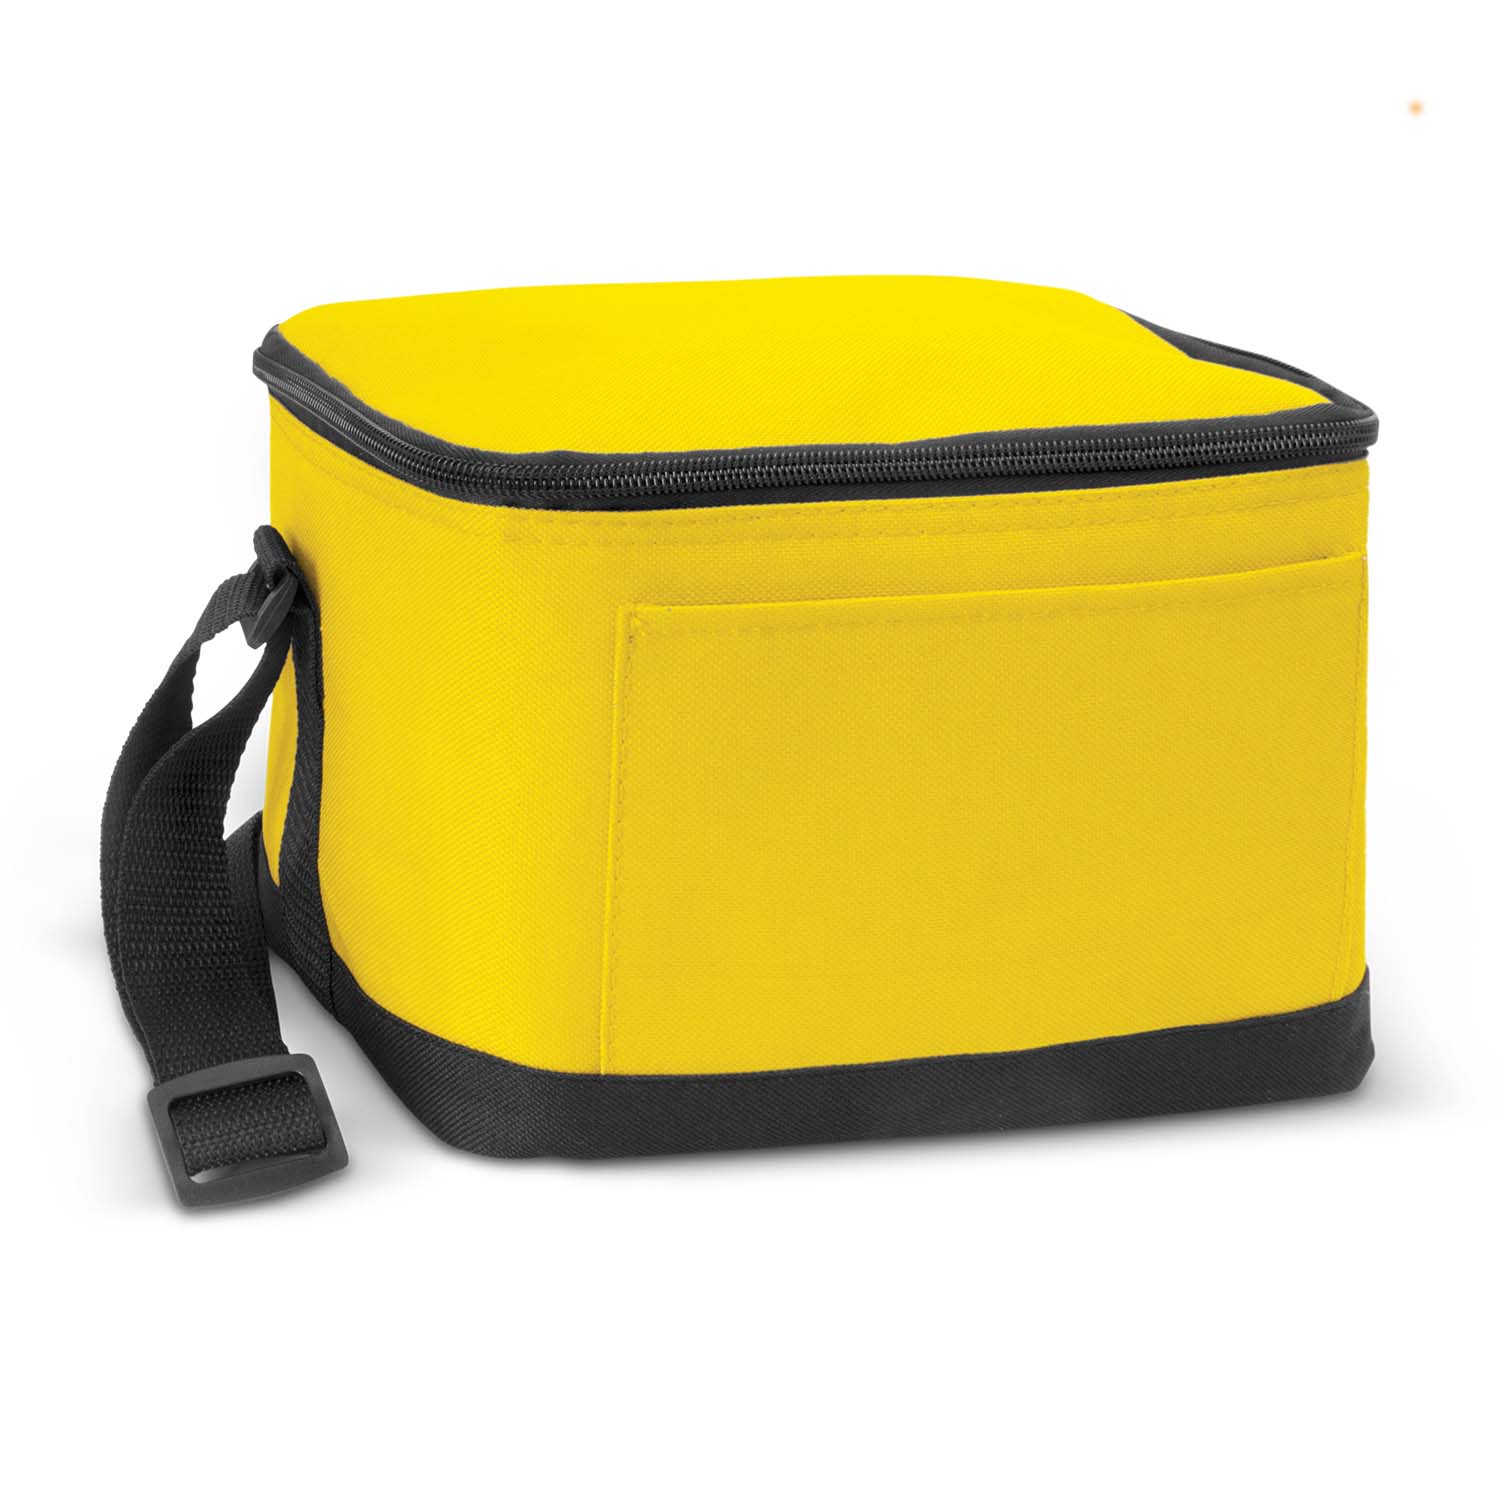 Personalised Yellow Bathurst Cooler Bags in Perth